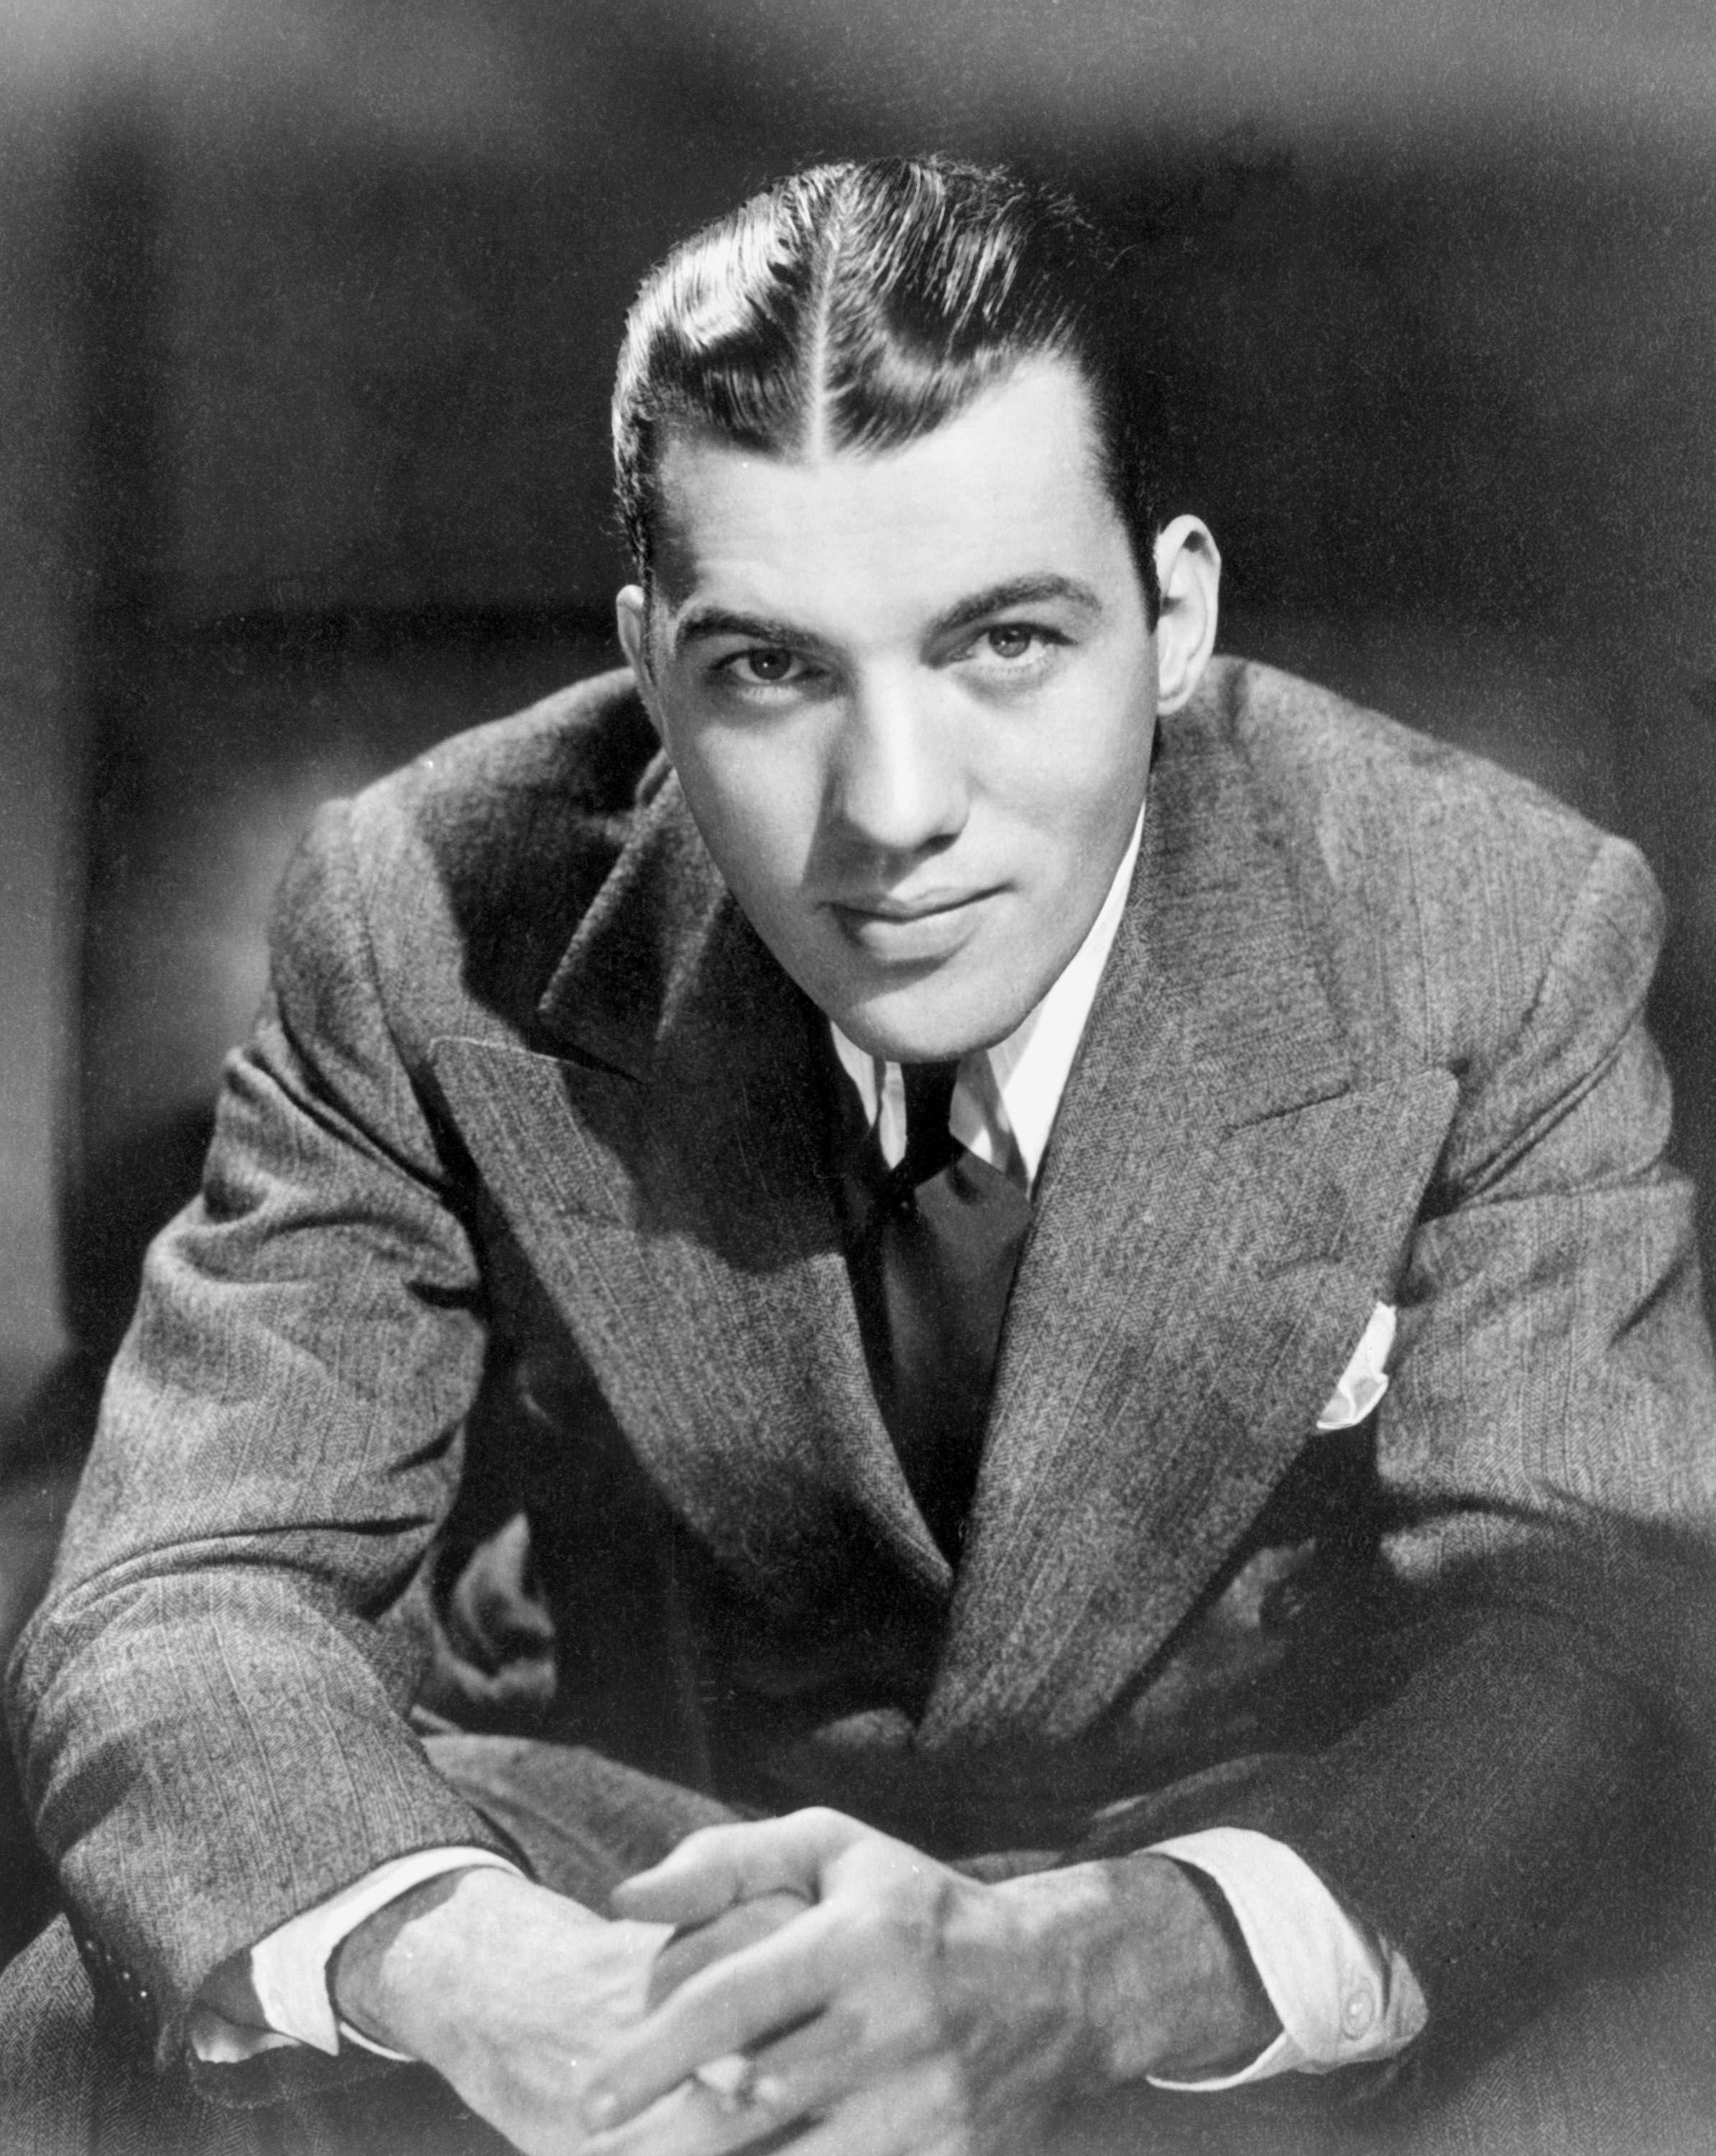  Television variety show host Ed Sullivan poses for a portrait during his career as a journalist in 1946 | Photo: Getty Images